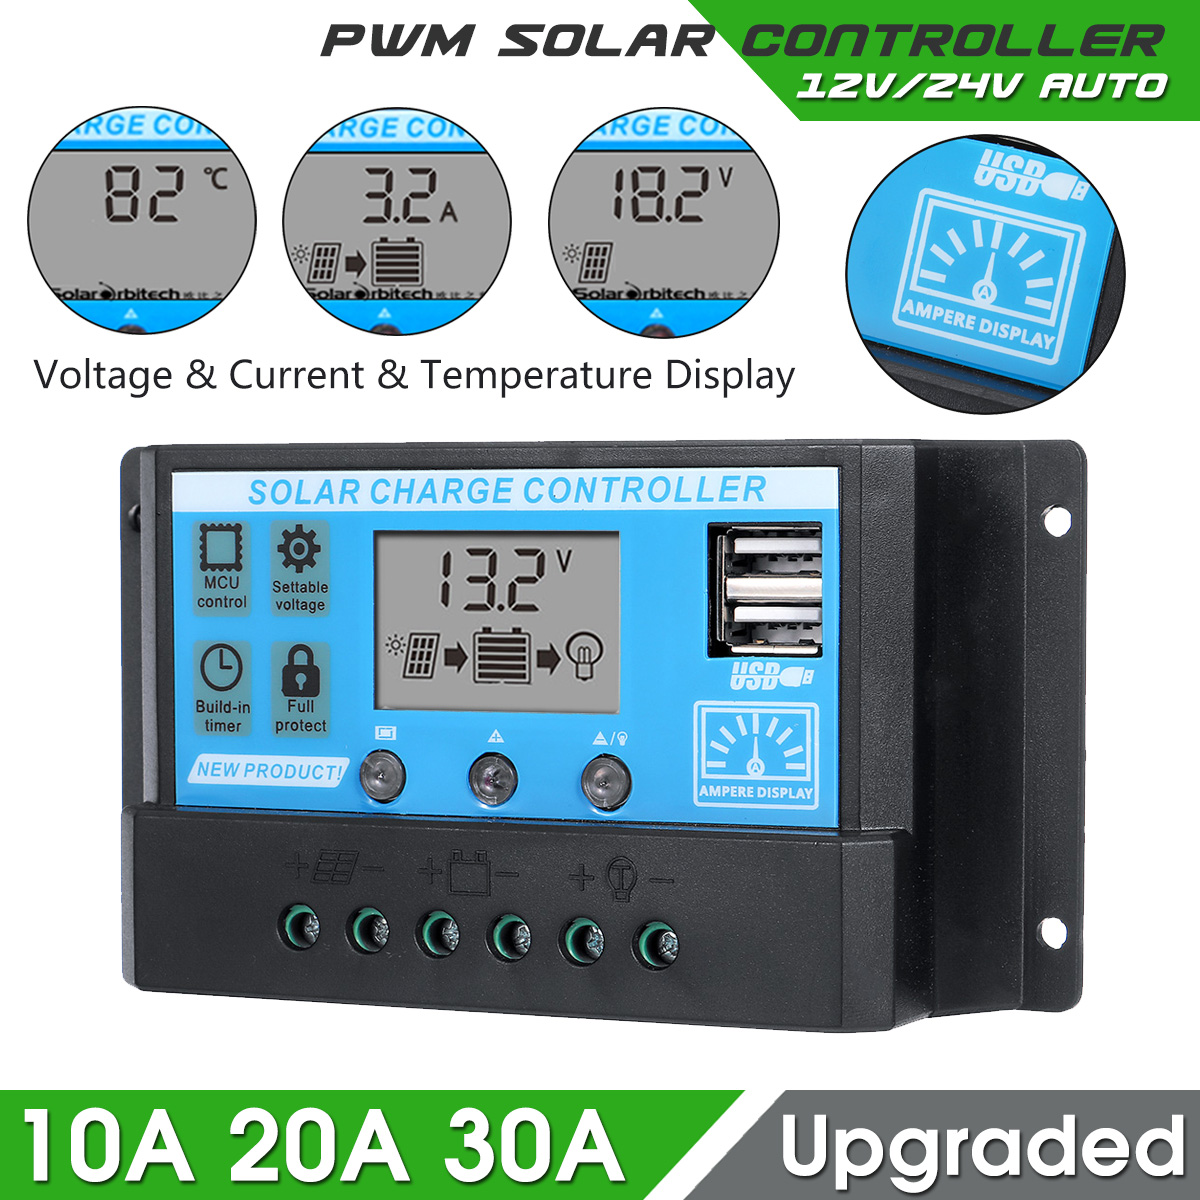 Upgraded-30A-12V24V-Auto-VoltAmpTemp-Display-PWM-Solar-Panel-Charge-Controller-1540530-1